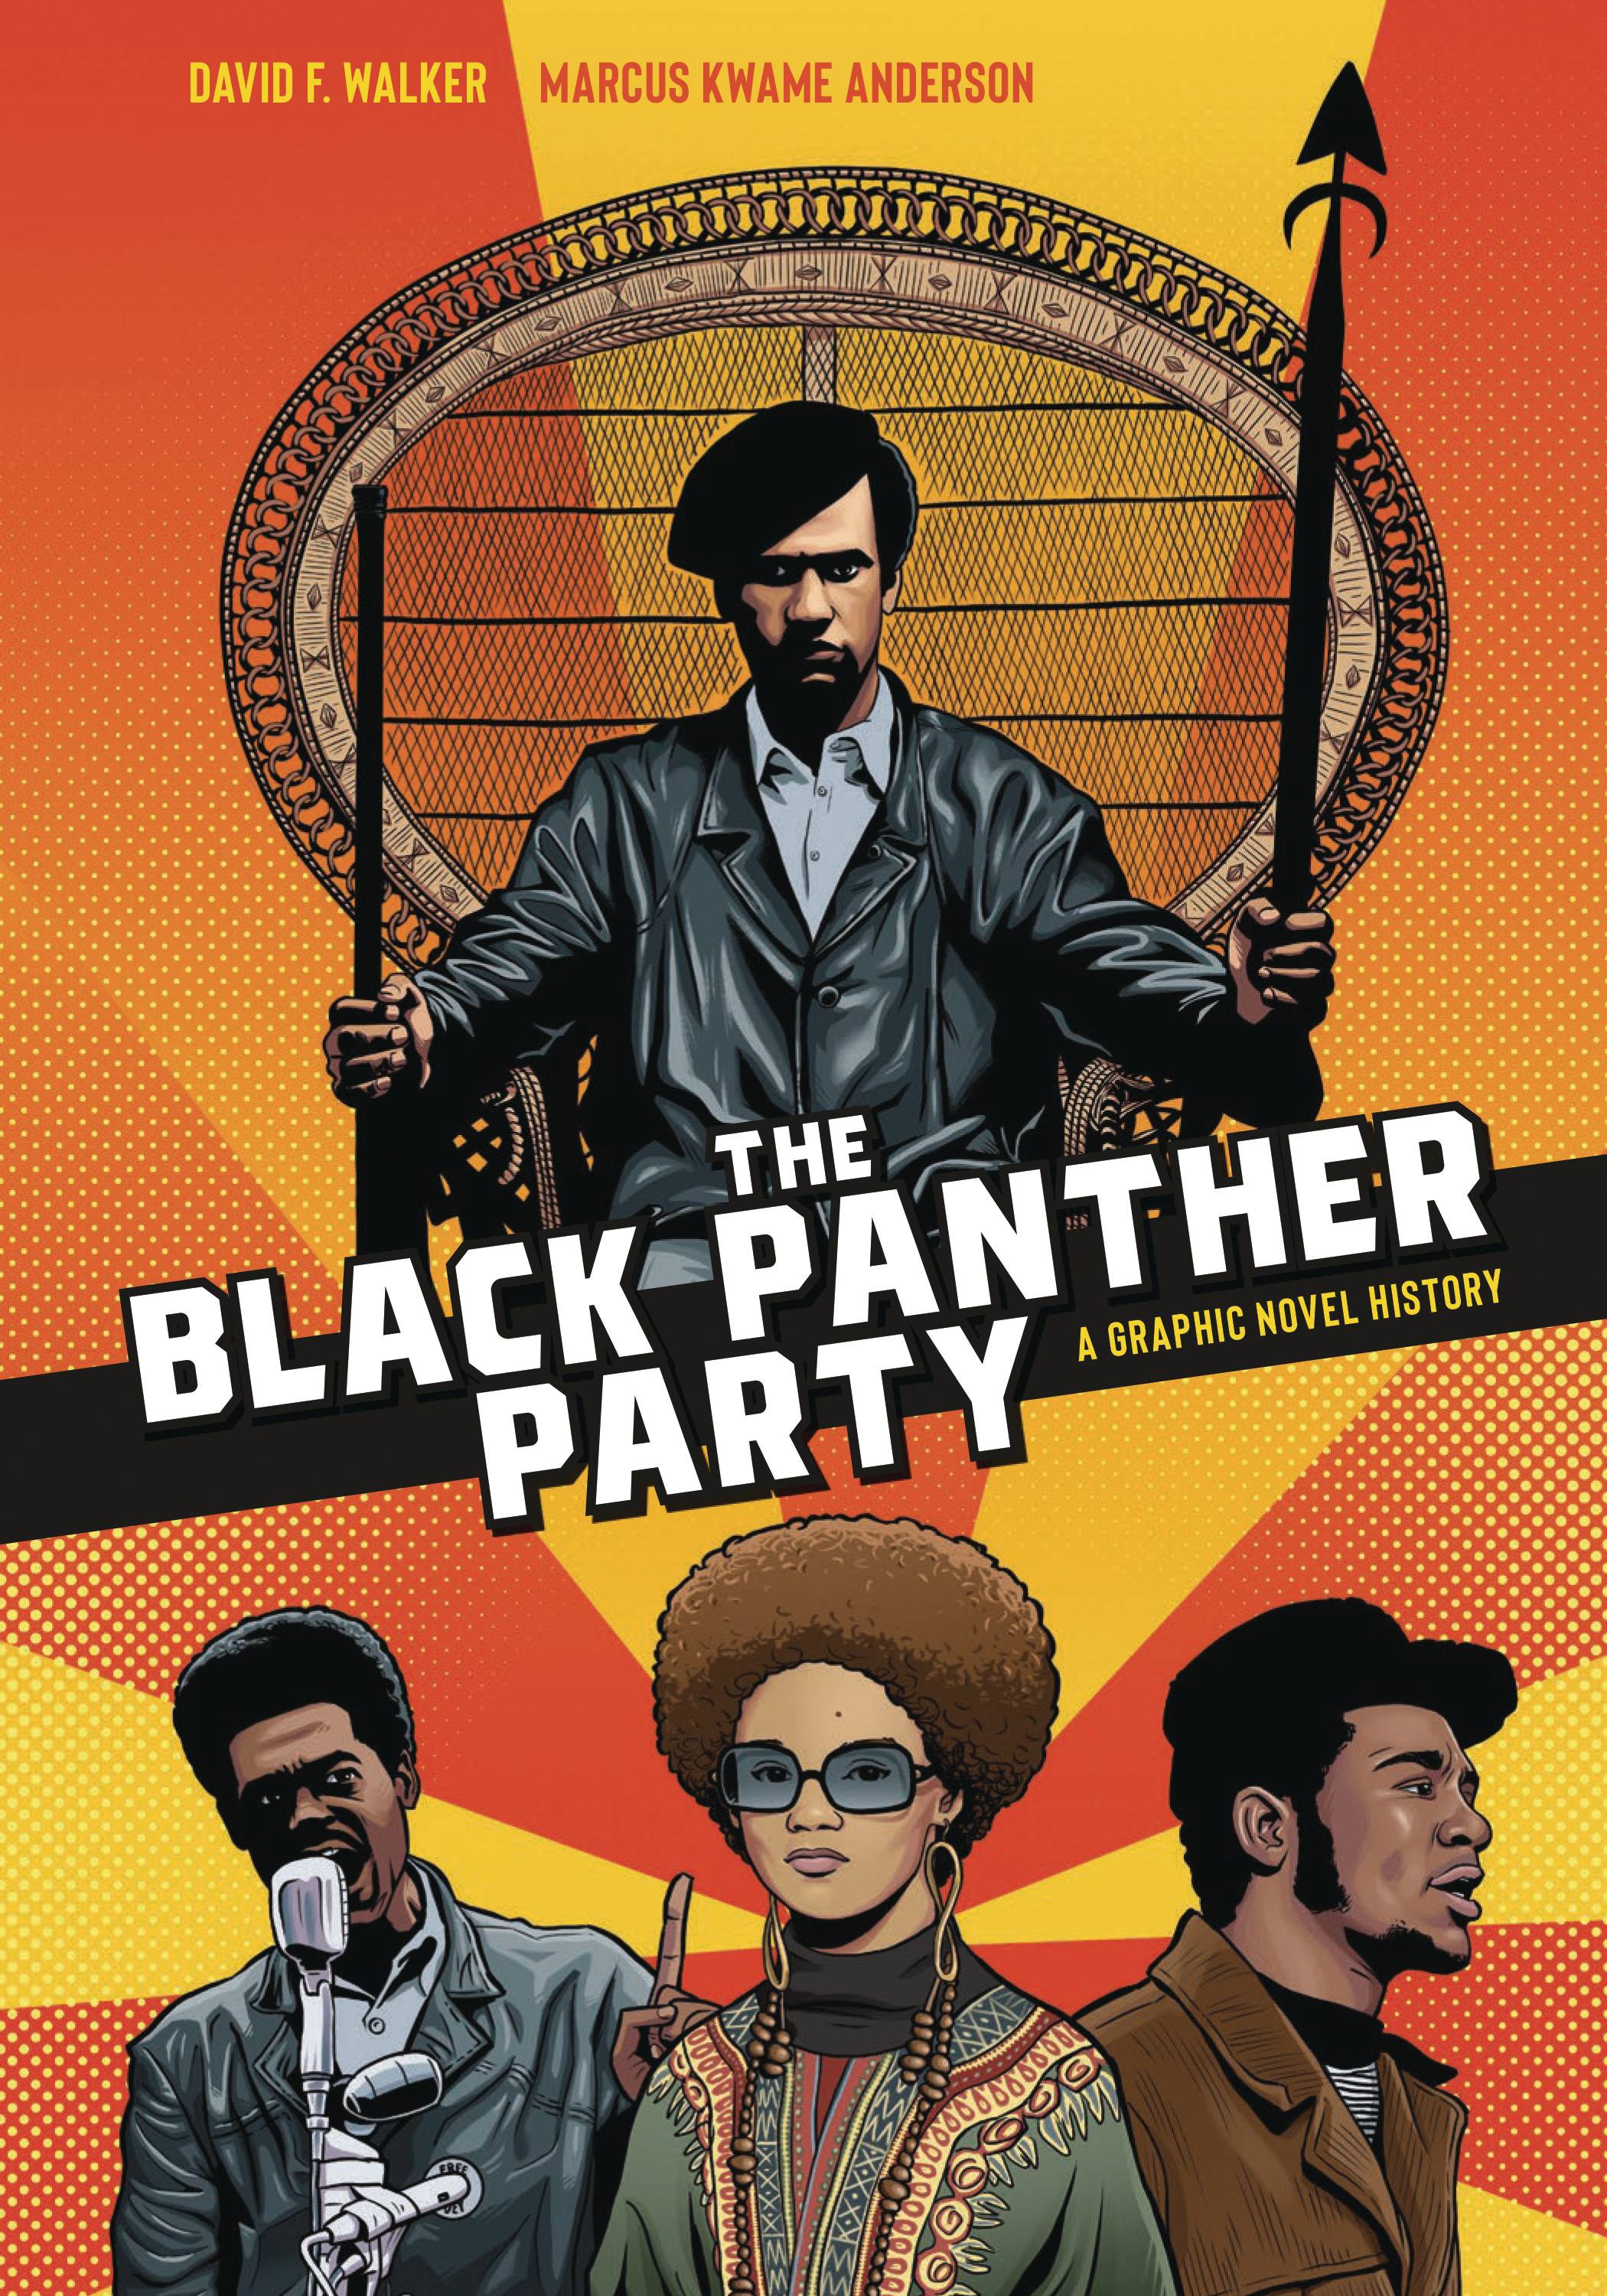 Marcus Kwame Anderson, David F. Walker: Black Panther Party (2021, Potter/Ten Speed/Harmony/Rodale)